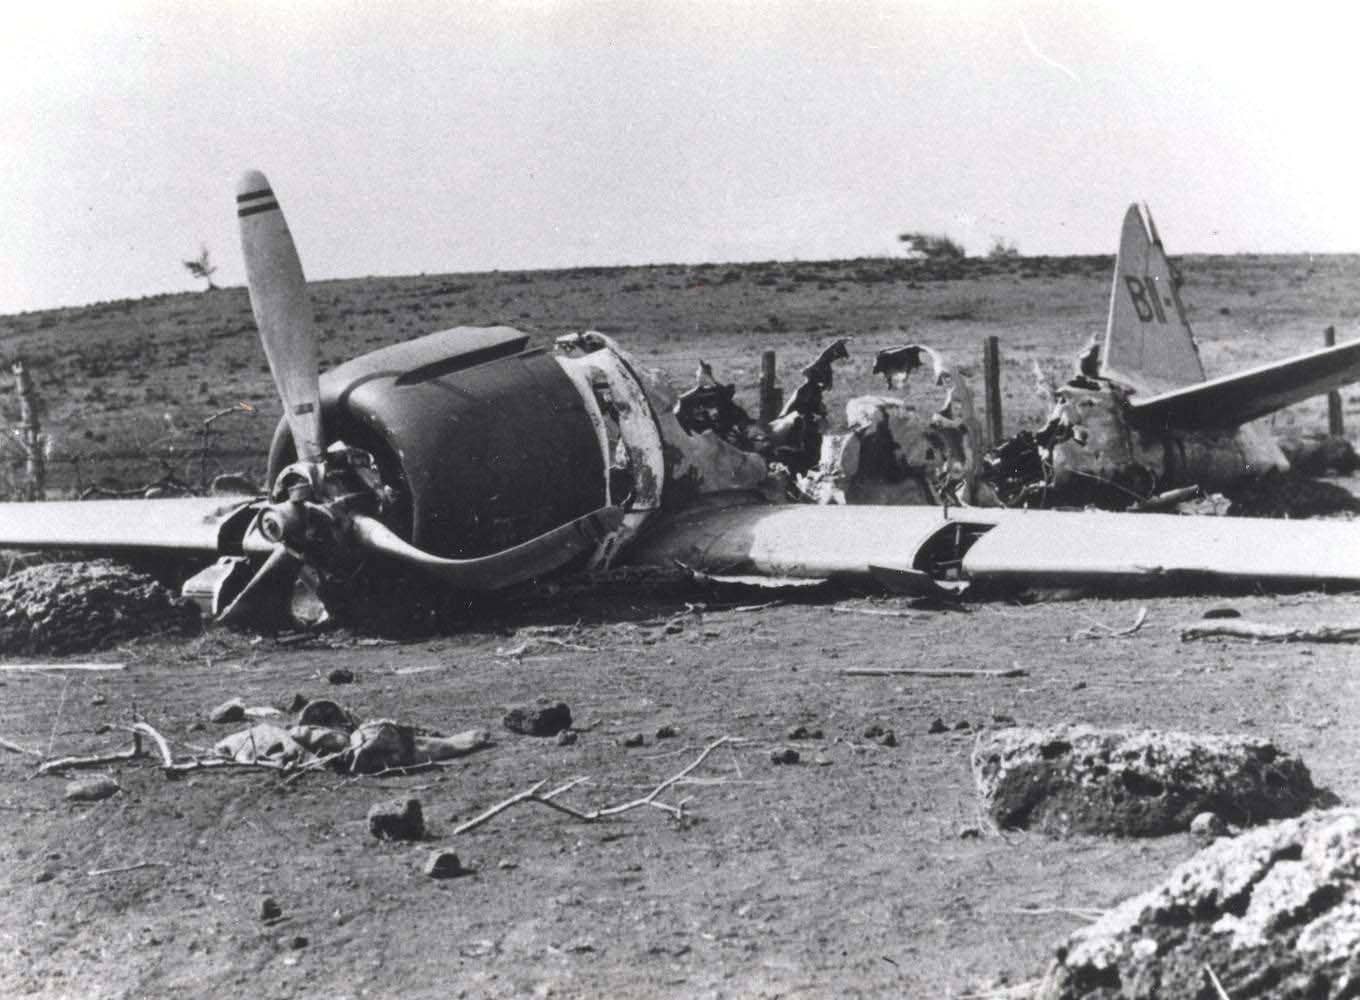 Damaged aircraft on Hickam Field, Hawaii, after the surprise Japanese attack on Pearl Harbor.